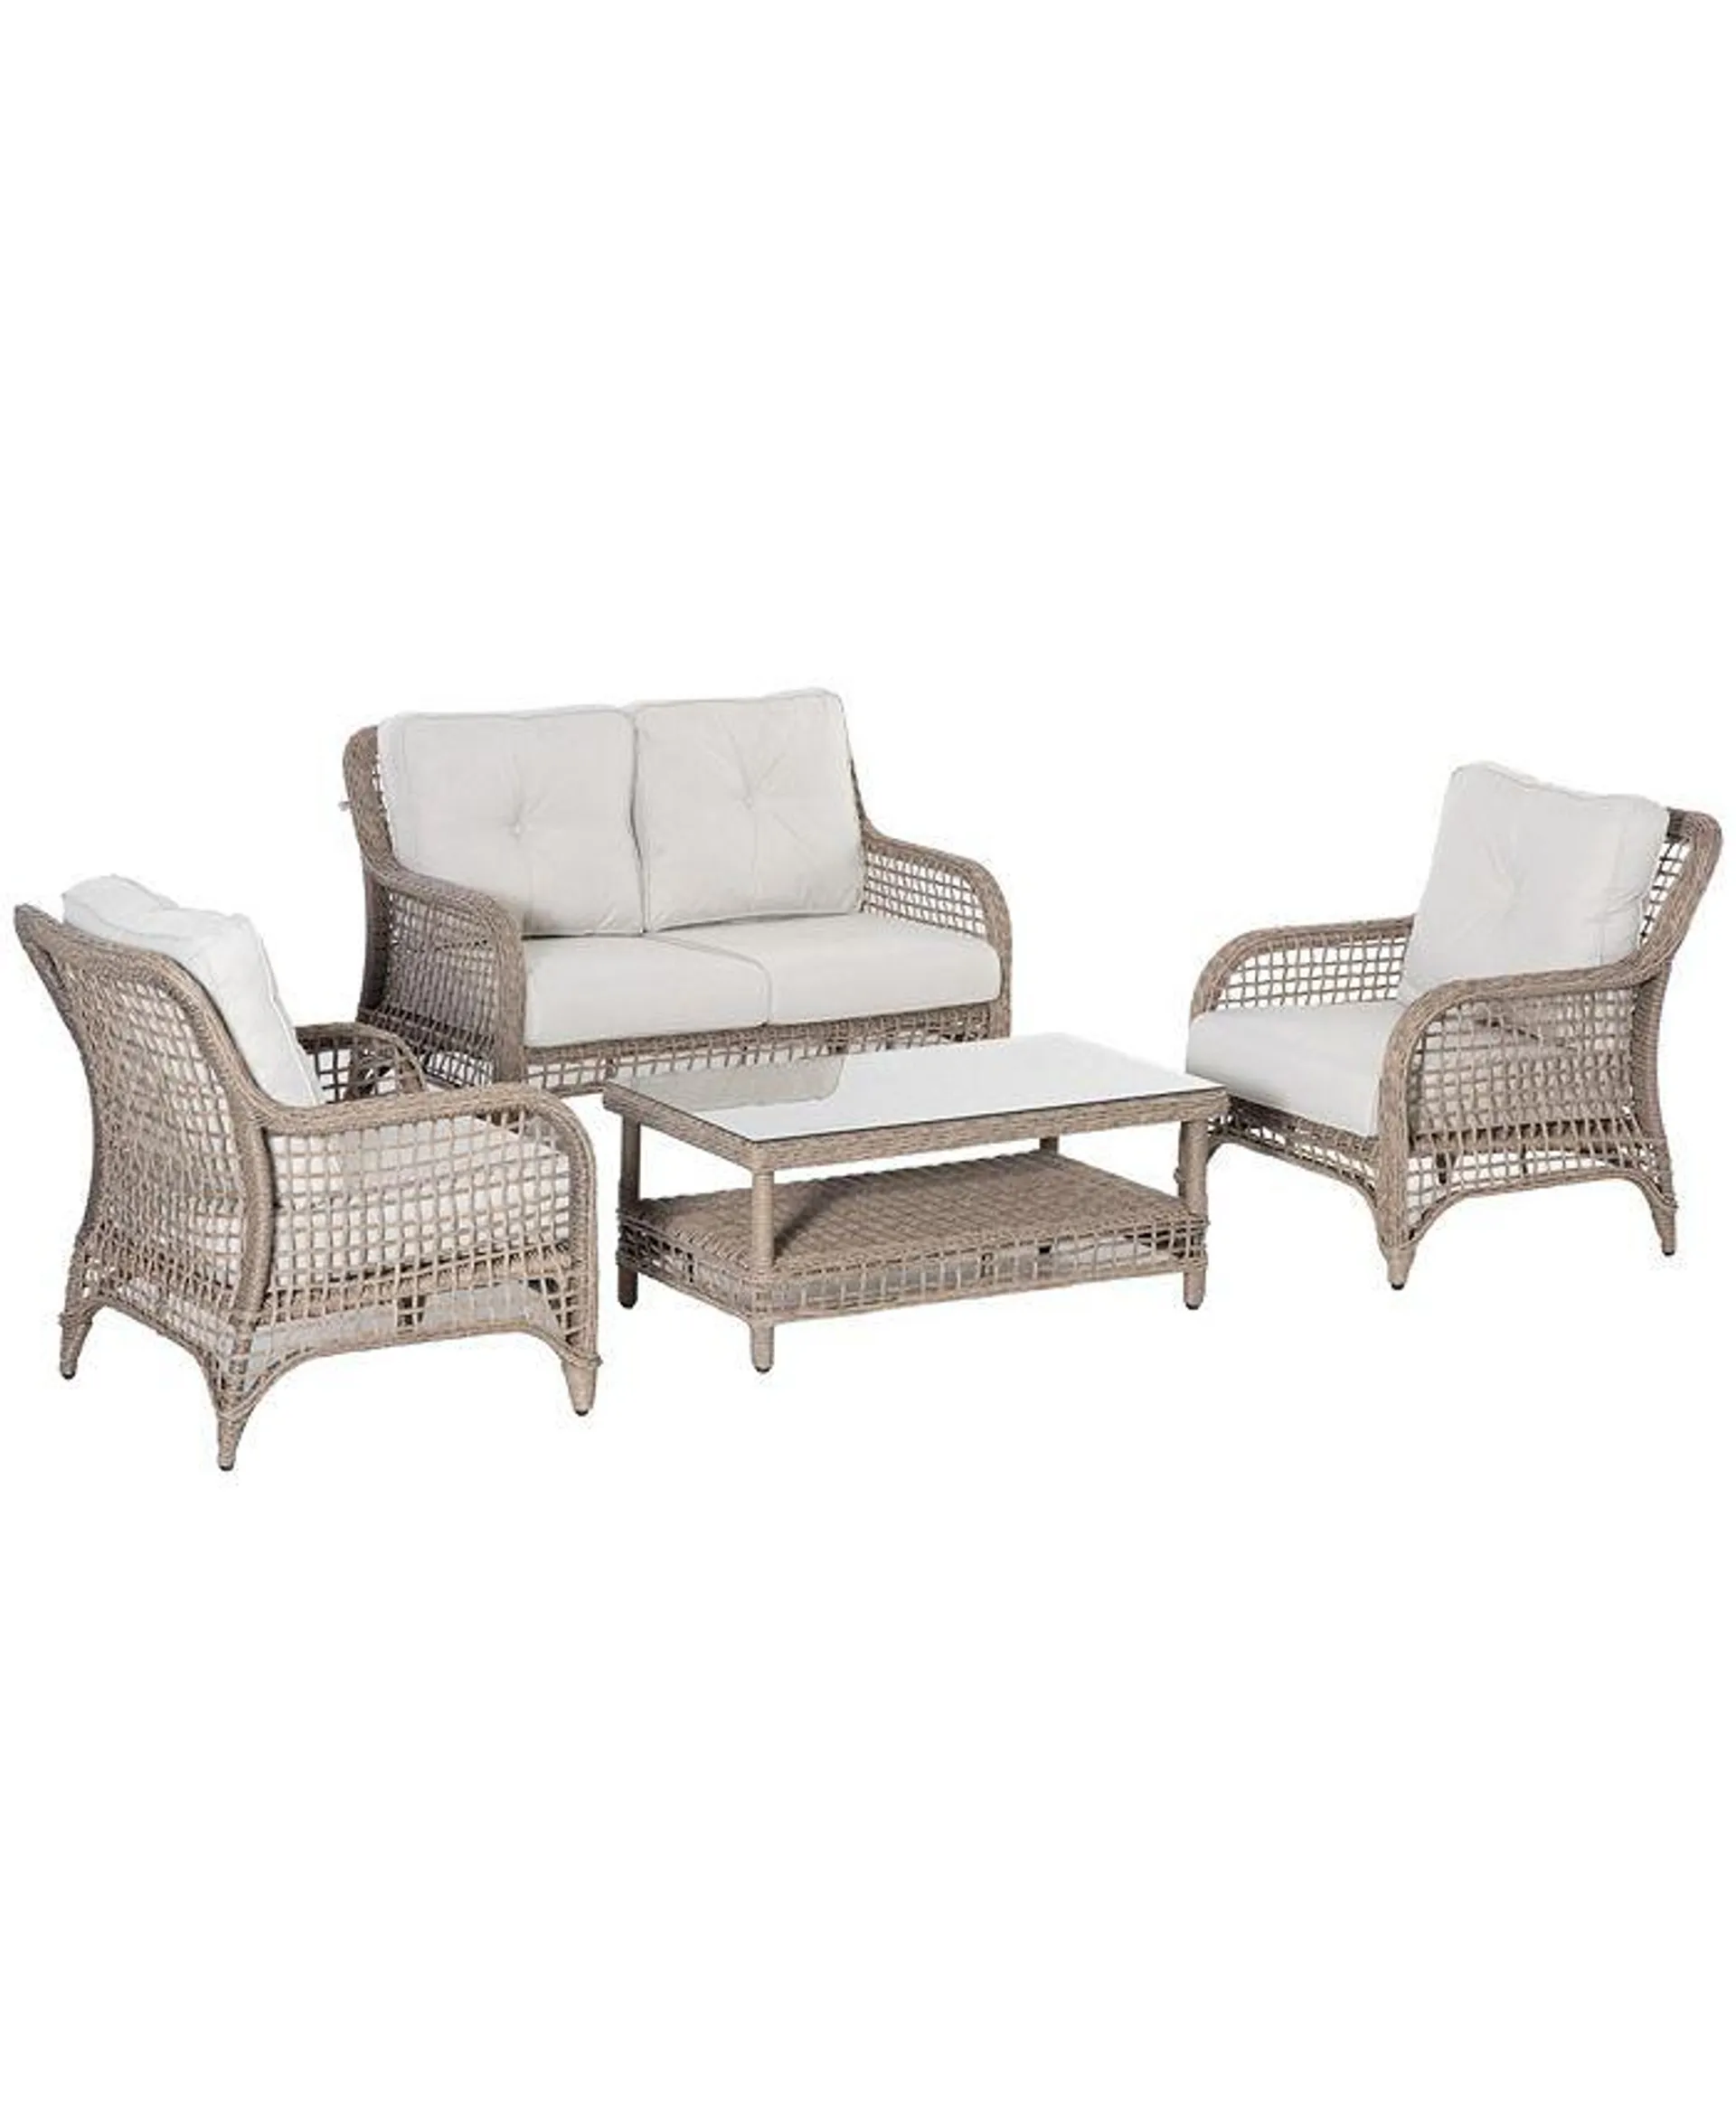 4pc Outdoor Patio Furniture Set, 2 Plastic Rattan Chairs, 1 PE Wicker Loveseat Sofa, 1 2-Tier Center Coffee Table w/ Tempered Glass Table-Top, Soft Cushions for Backyard, Garden, Cream White